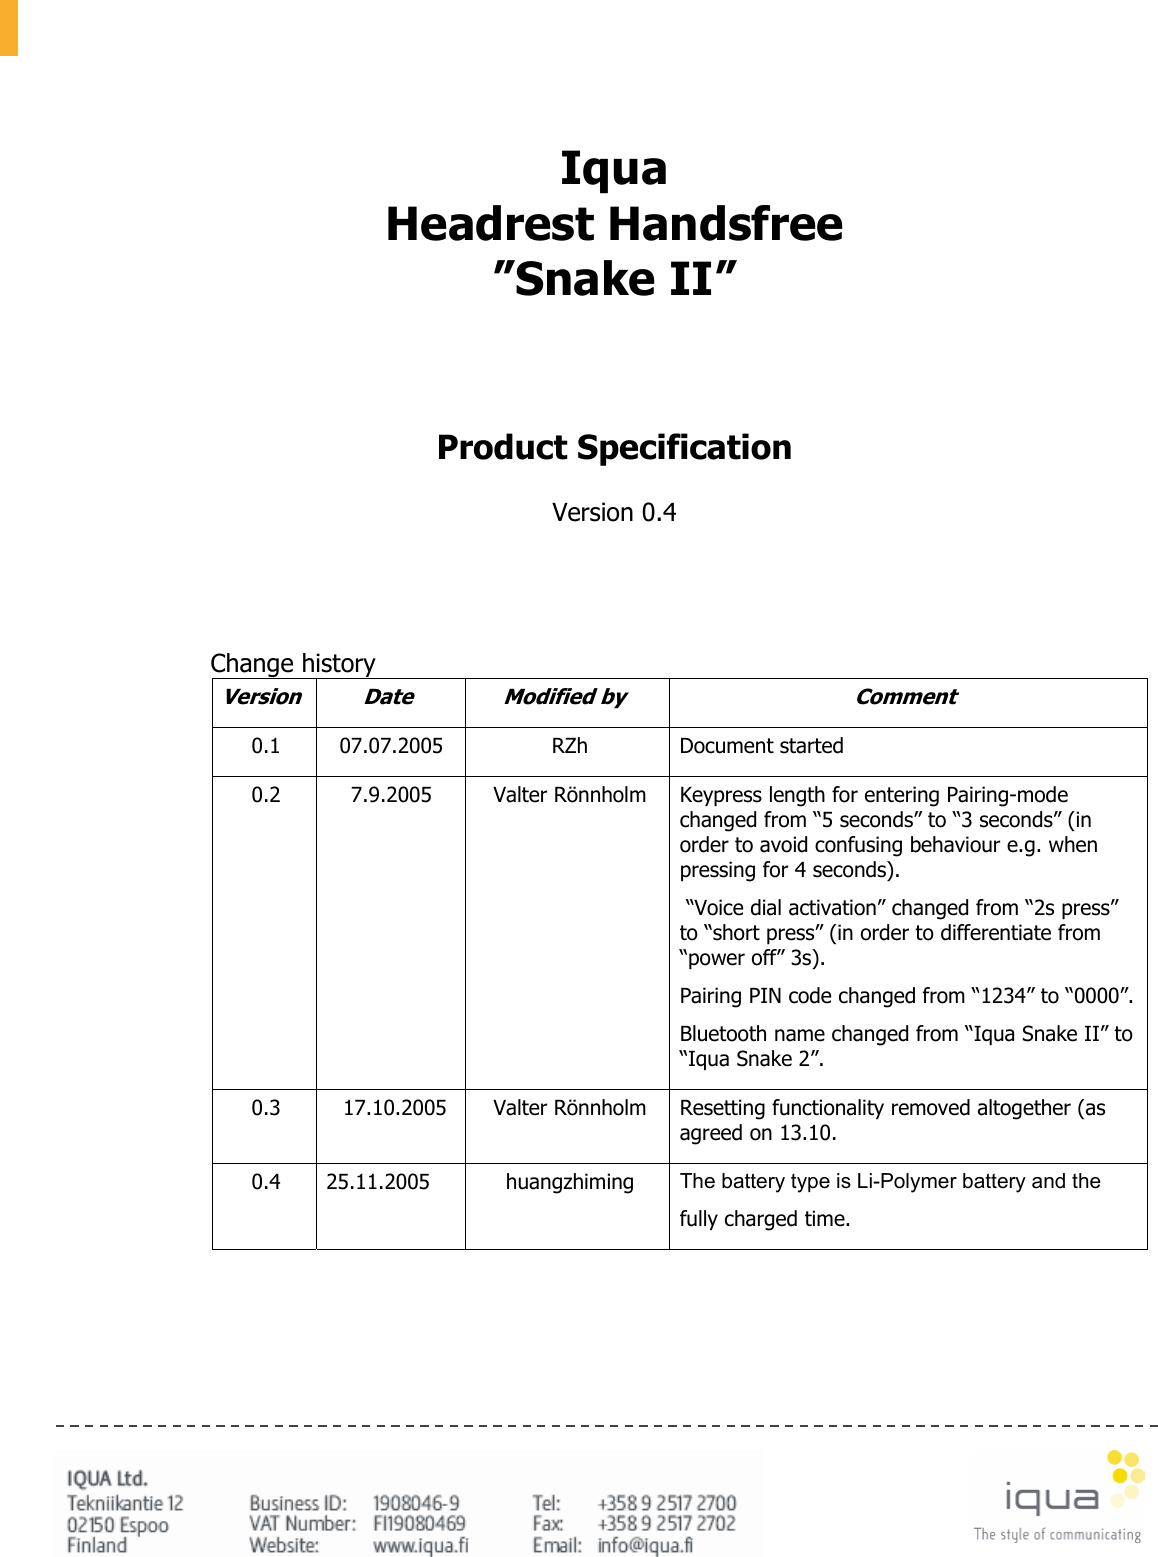       Iqua Headrest Handsfree ”Snake II”     Product Specification  Version 0.4        Change history Version Date  Modified by  Comment 0.1 07.07.2005  RZh  Document started 0.2 7.9.2005 Valter Rönnholm Keypress length for entering Pairing-mode changed from “5 seconds” to “3 seconds” (in order to avoid confusing behaviour e.g. when pressing for 4 seconds).  “Voice dial activation” changed from “2s press” to “short press” (in order to differentiate from “power off” 3s). Pairing PIN code changed from “1234” to “0000”.Bluetooth name changed from “Iqua Snake II” to “Iqua Snake 2”. 0.3  17.10.2005  Valter Rönnholm  Resetting functionality removed altogether (as agreed on 13.10. 0.4 25.11.2005  huangzhiming The battery type is Li-Polymer battery and the  fully charged time.      